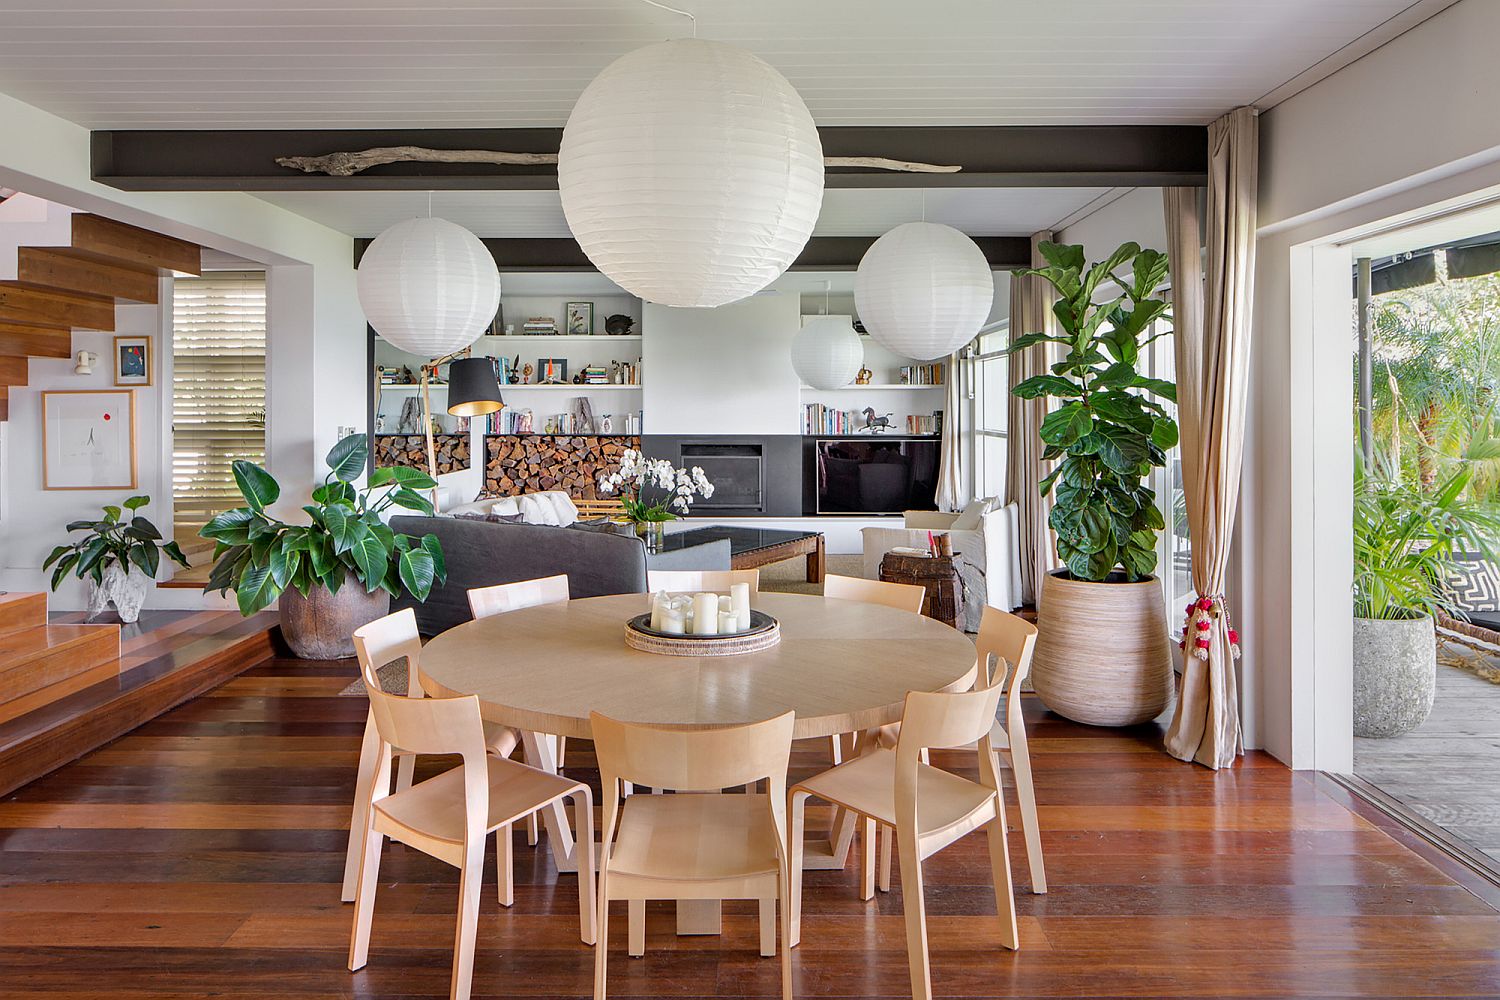 Striking-pendants-in-white-stand-out-visually-while-also-accentuating-the-color-scheme